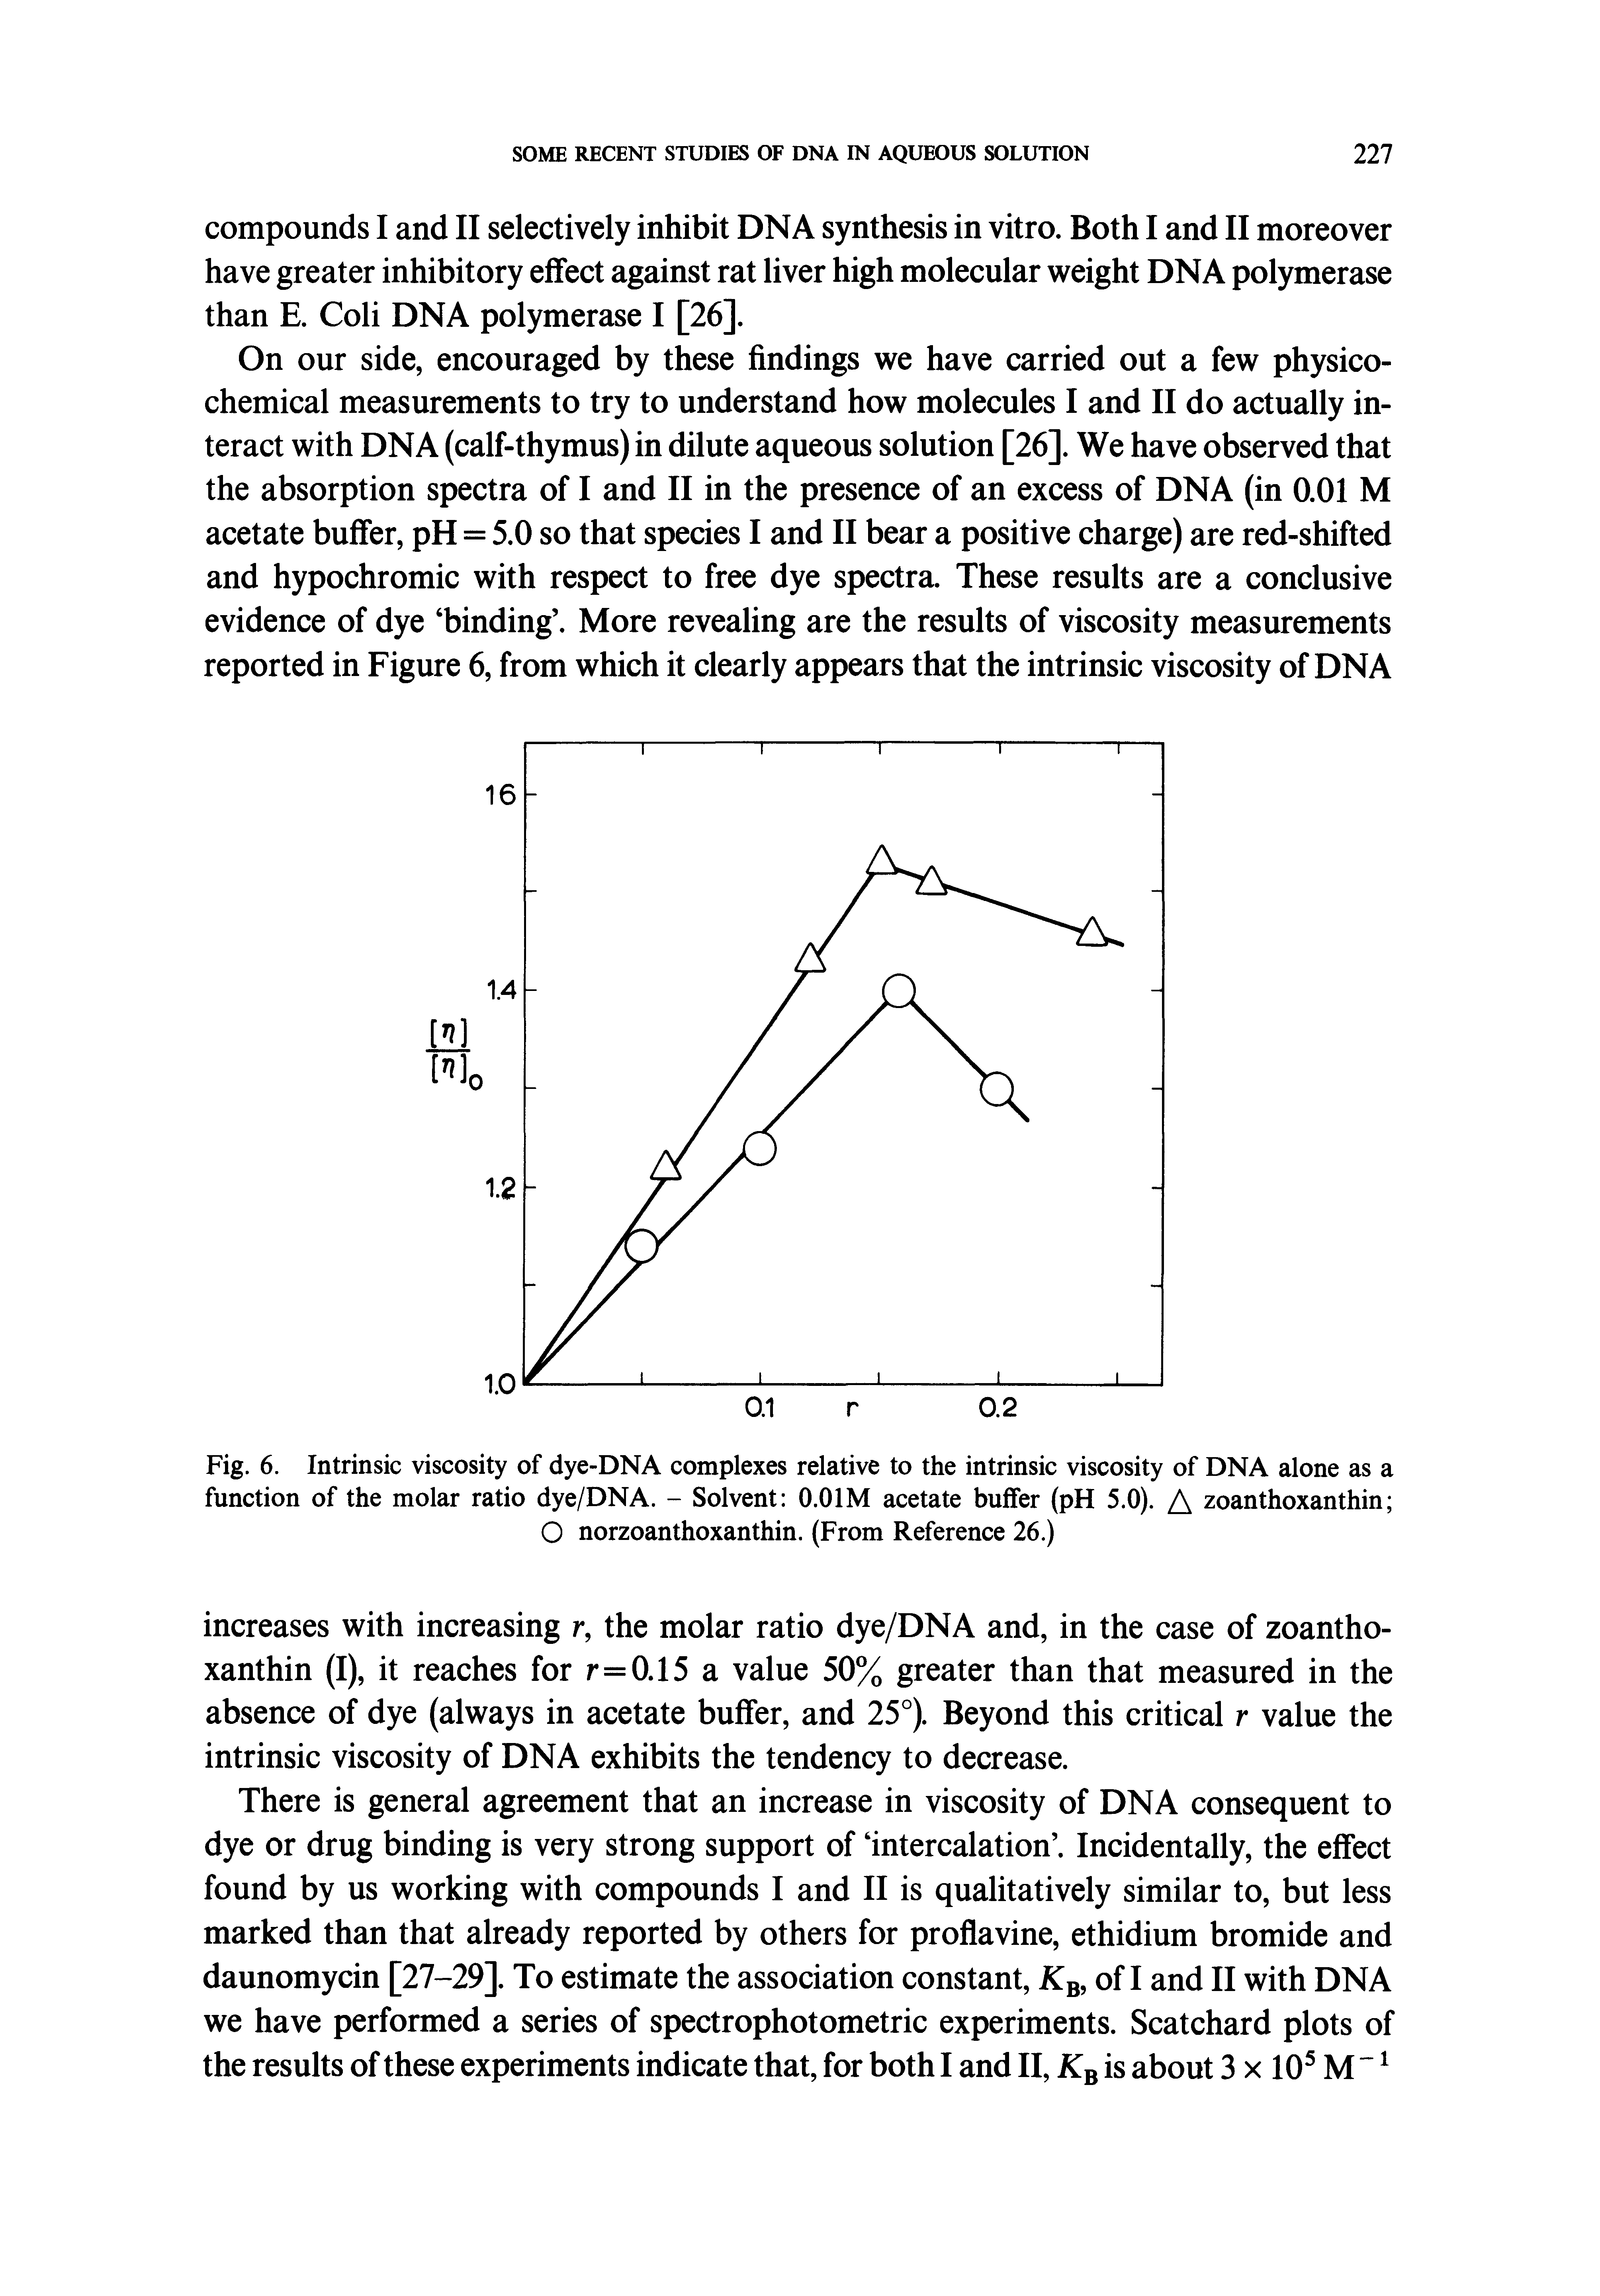 Fig. 6. Intrinsic viscosity of dye-DNA complexes relative to the intrinsic viscosity of DNA alone as a function of the molar ratio dye/DNA. - Solvent O.OIM acetate buffer (pH 5.0). A zoanthoxanthin O norzoanthoxanthin. (From Reference 26.)...